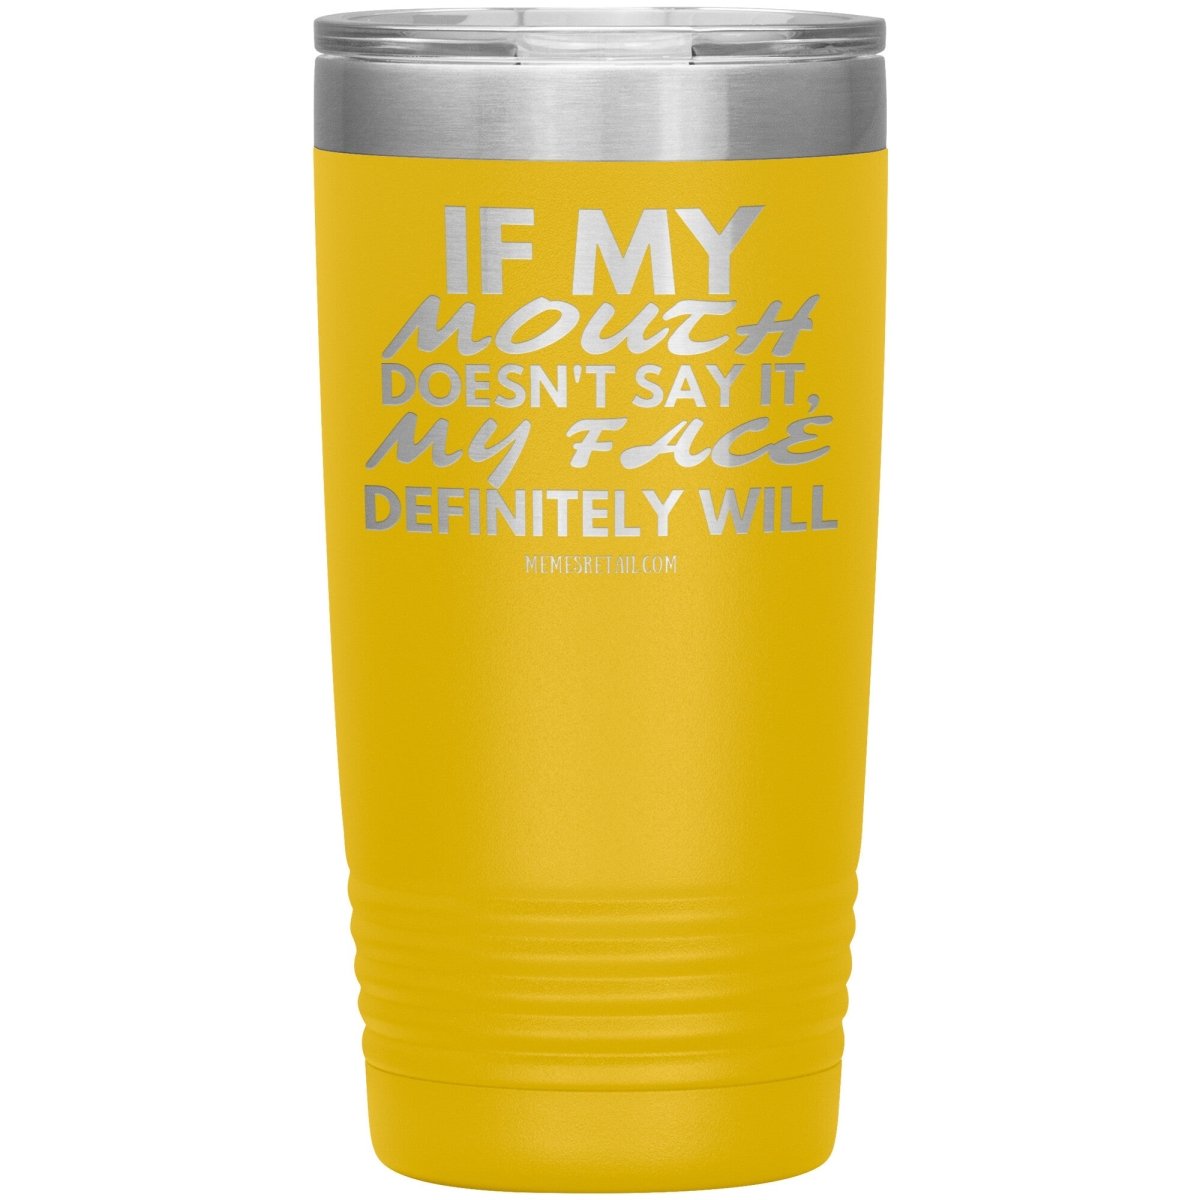 If my mouth doesn't say it, my face definitely will Tumblers, 20oz Insulated Tumbler / Yellow - MemesRetail.com